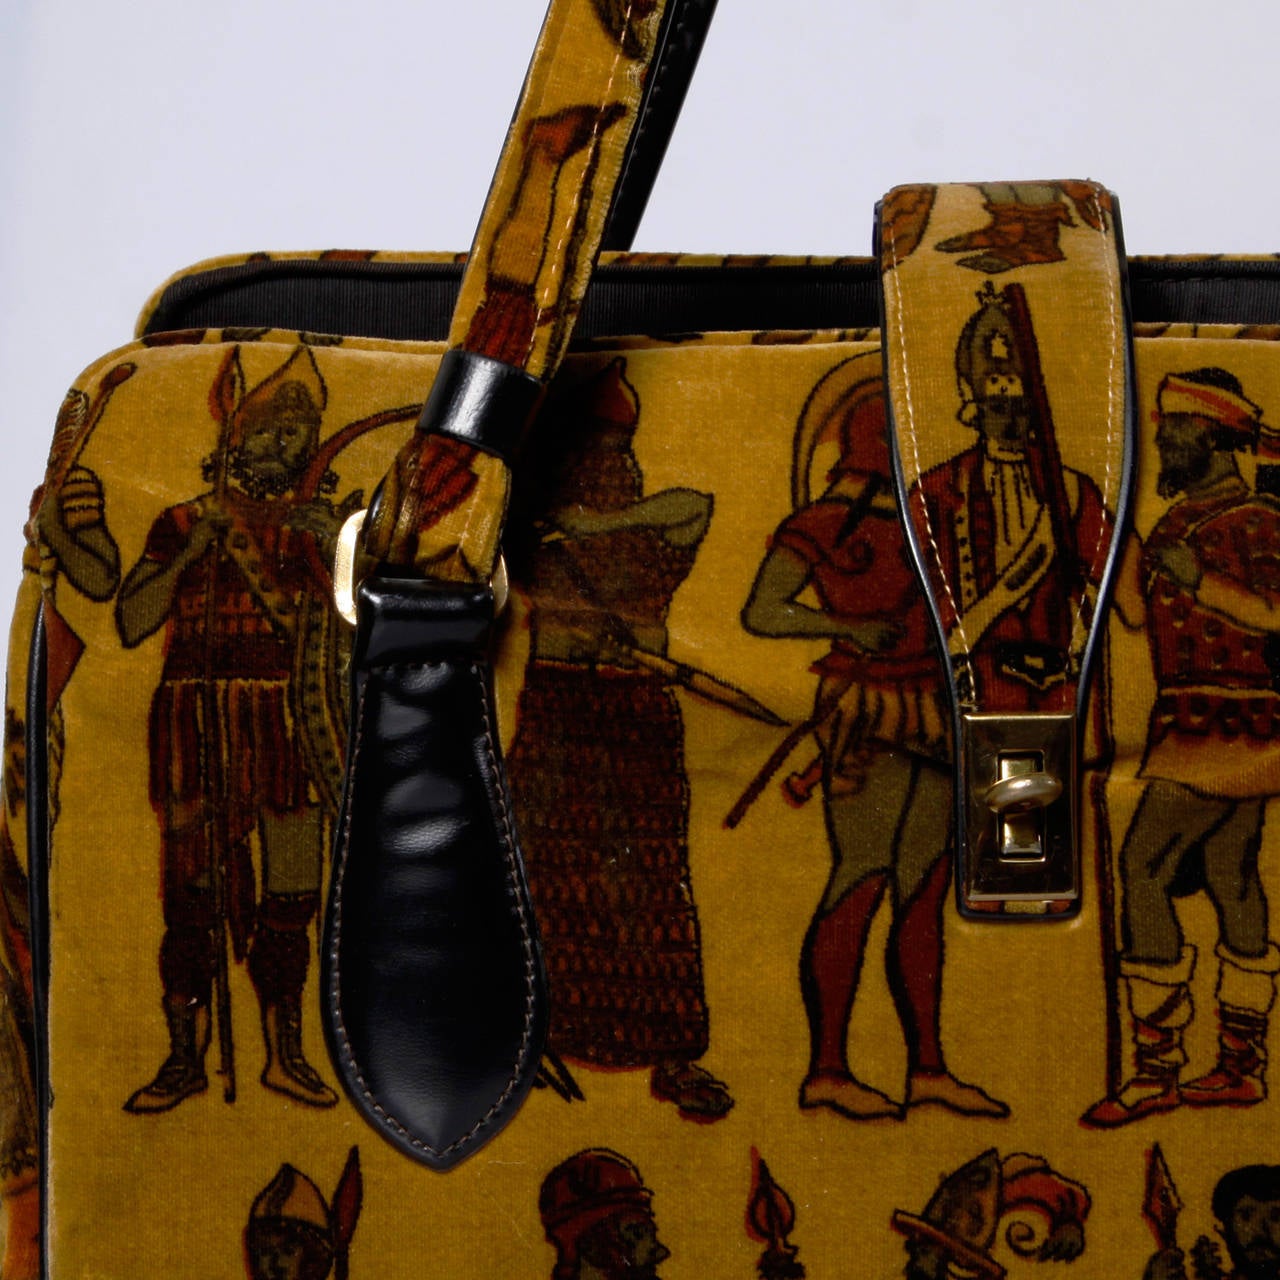 Novelty print velvet bag featuring Roman Soliders and vinyl trim.

Details:

Fully Lined
Three Inside Pockets/ One With Metal Zip Closure
Front Buckle Closure
One Size
Color: Mustard/ Black/ Burnt Orange/ Raw Umber/ Moss Green
Fabric: